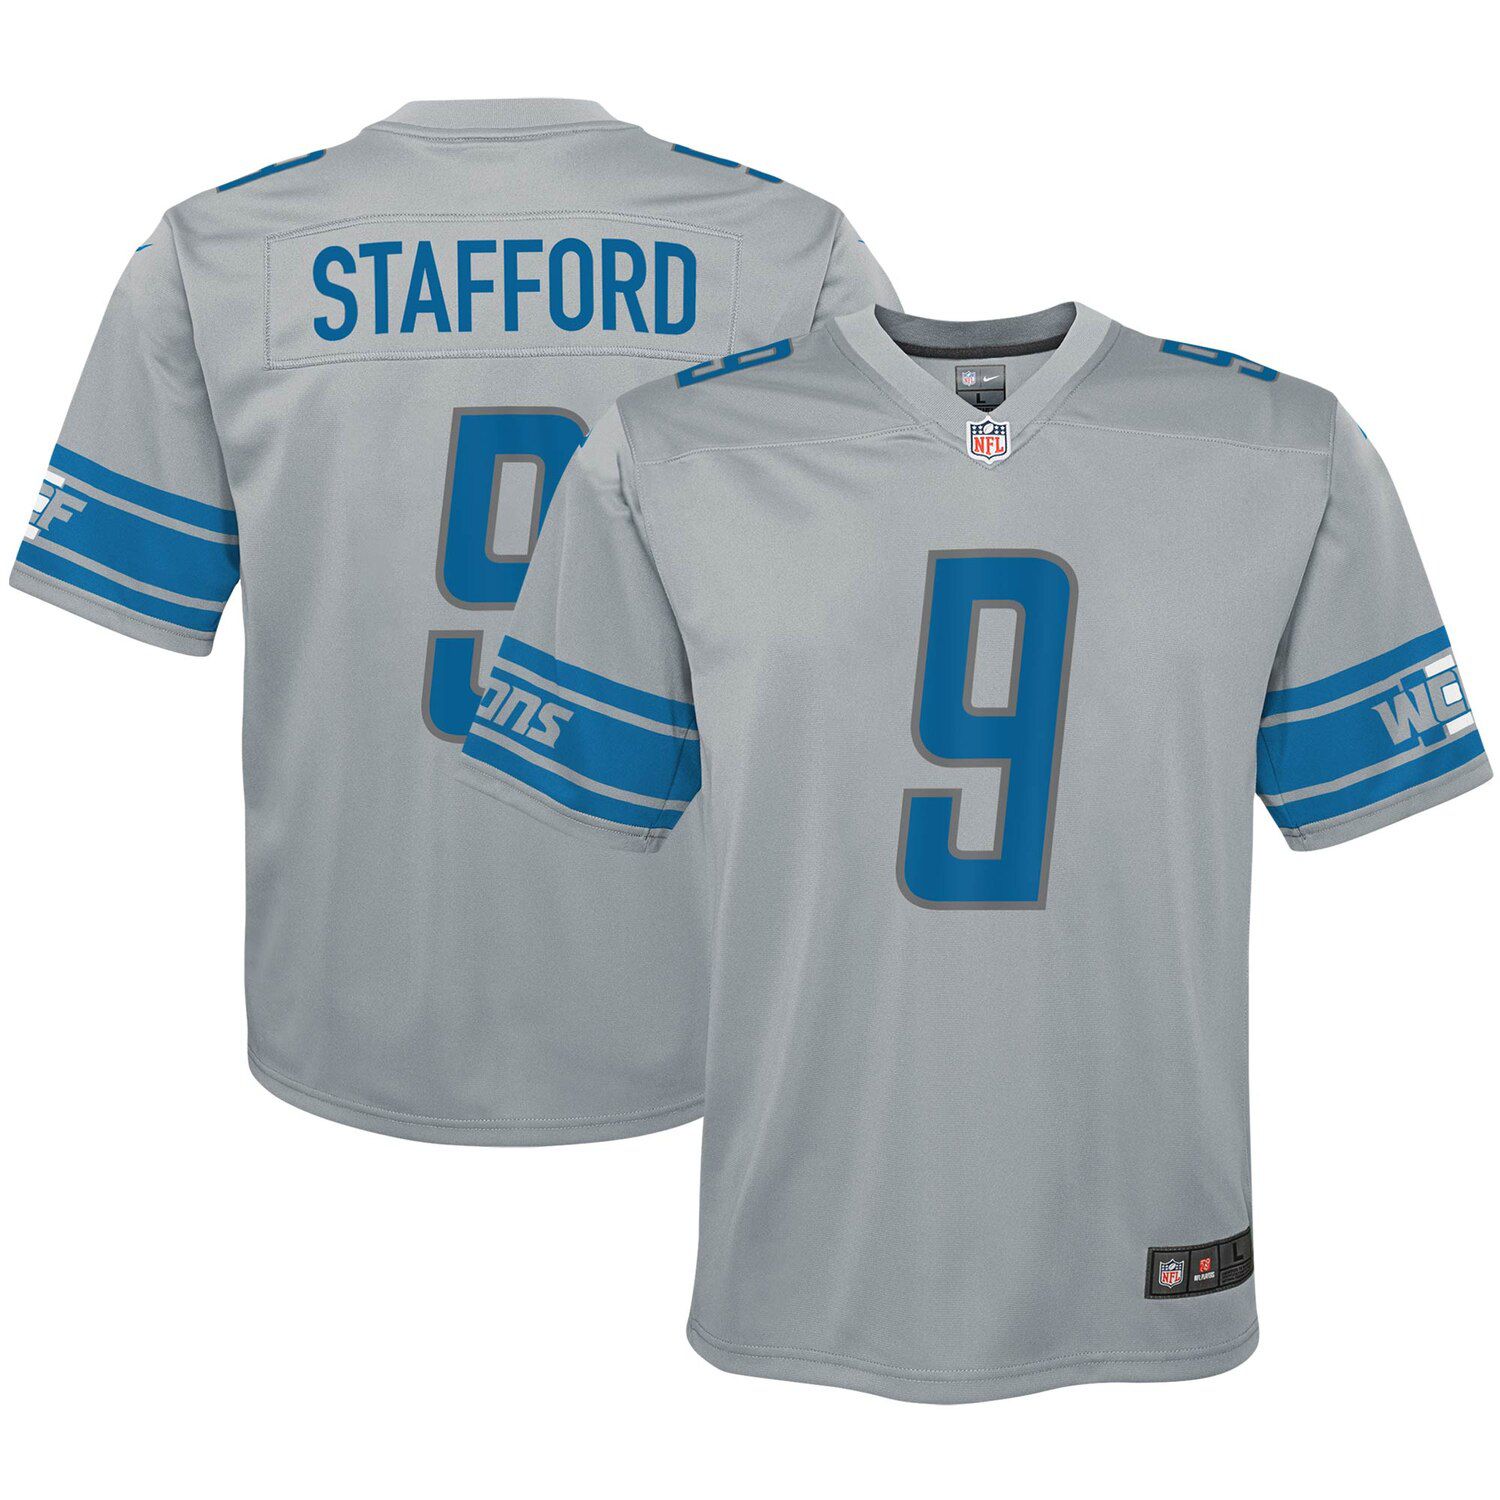 stafford jersey youth